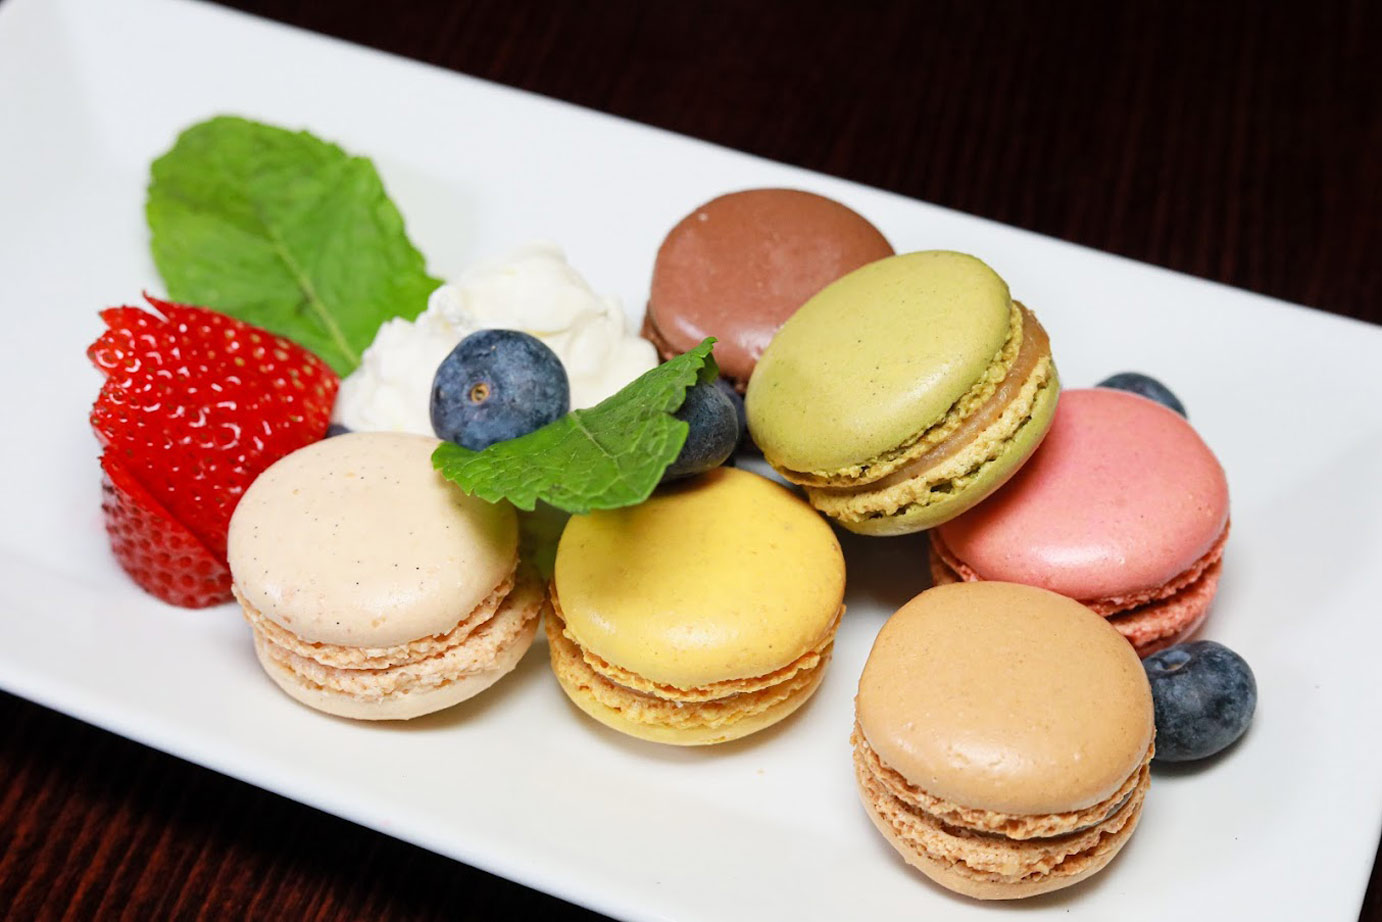 French macarons served